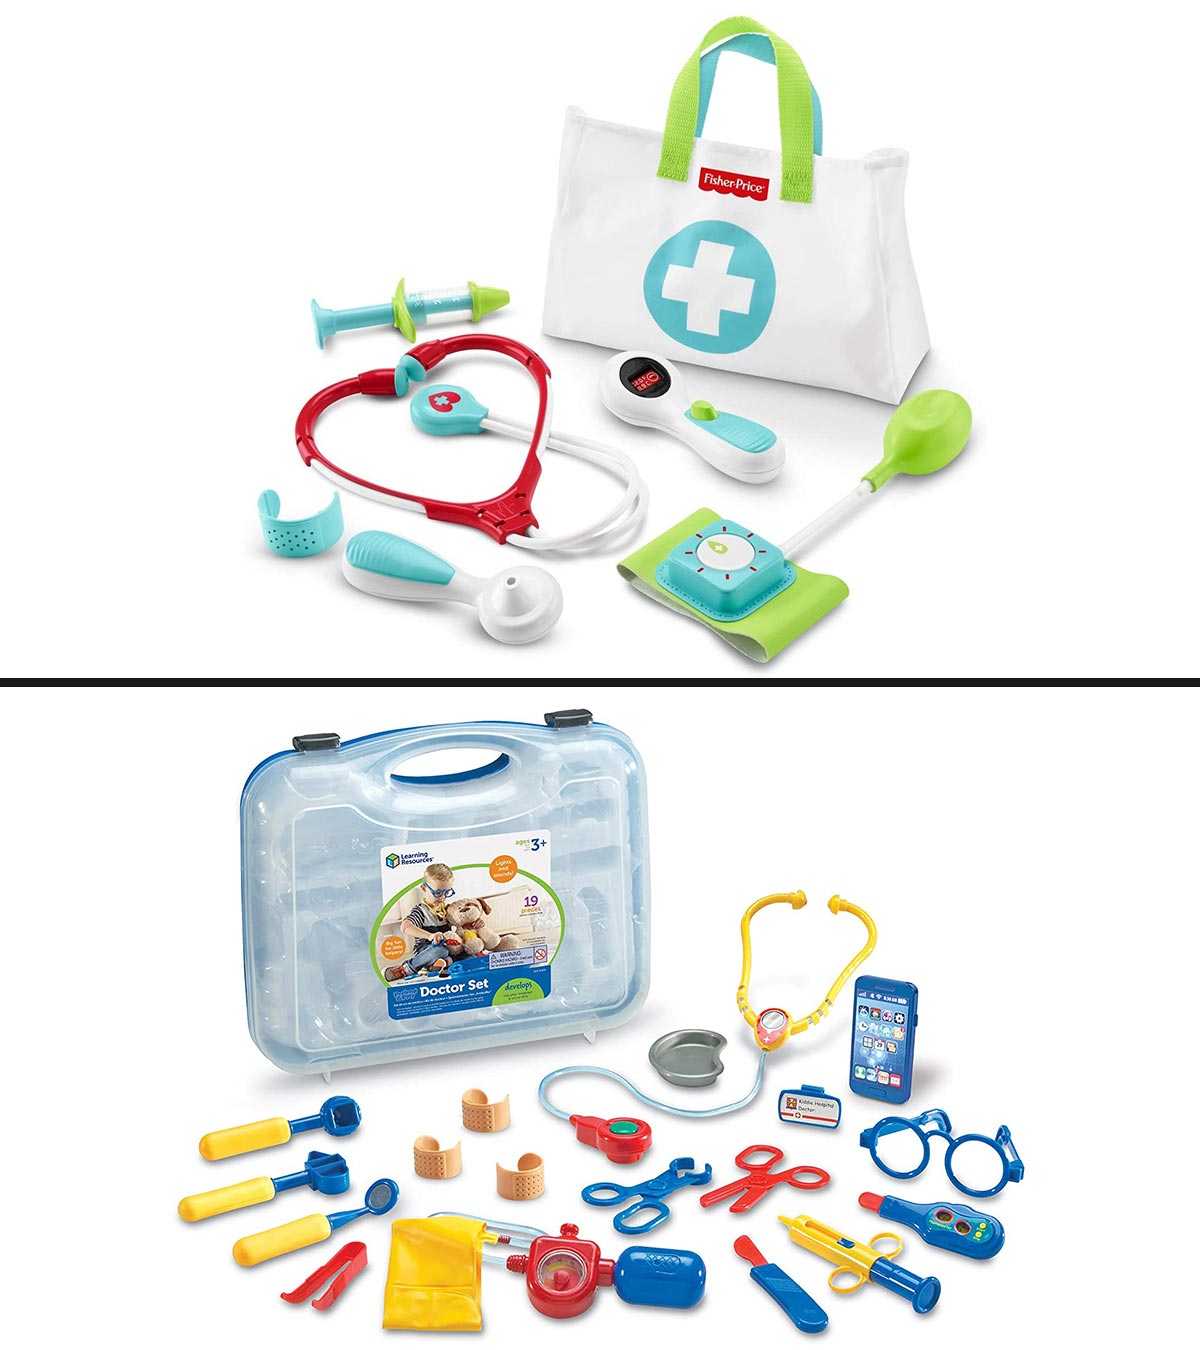 15 Best Doctor Kit Toys For Kids To Pretend-Play In 2023